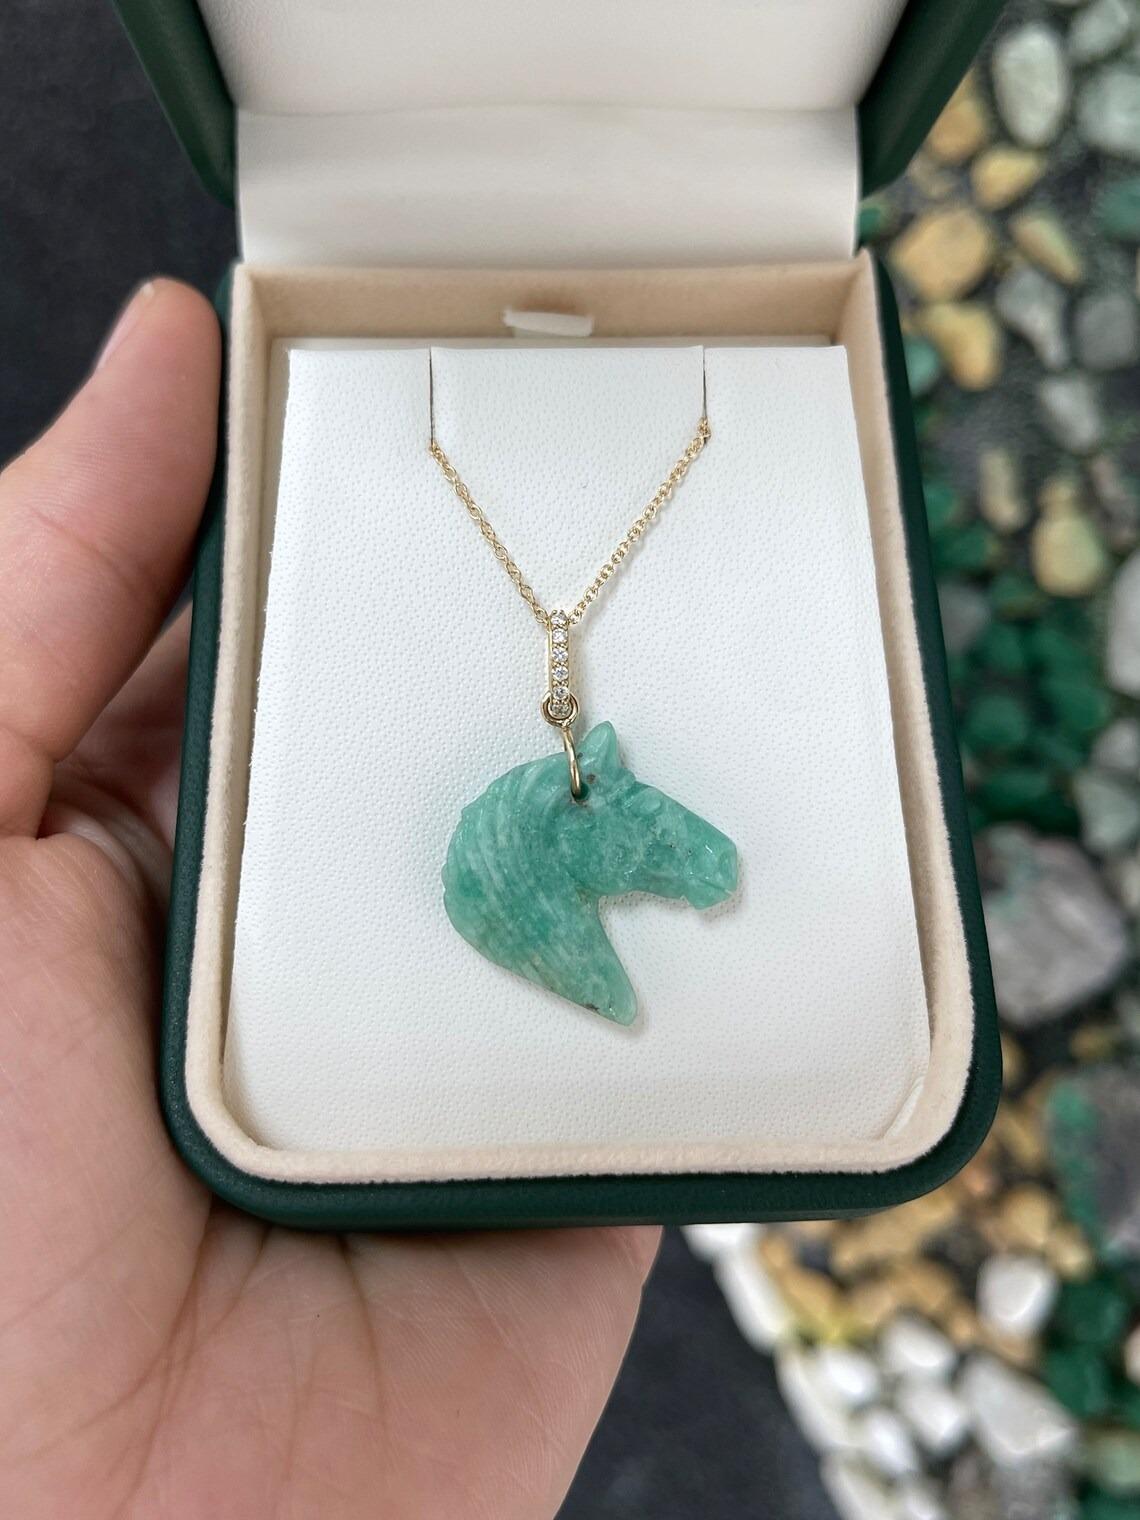 Uncut 13.57ct 14K Hand Carved Natural Colombian Emerald Rough Horse Pendant Necklace For Sale